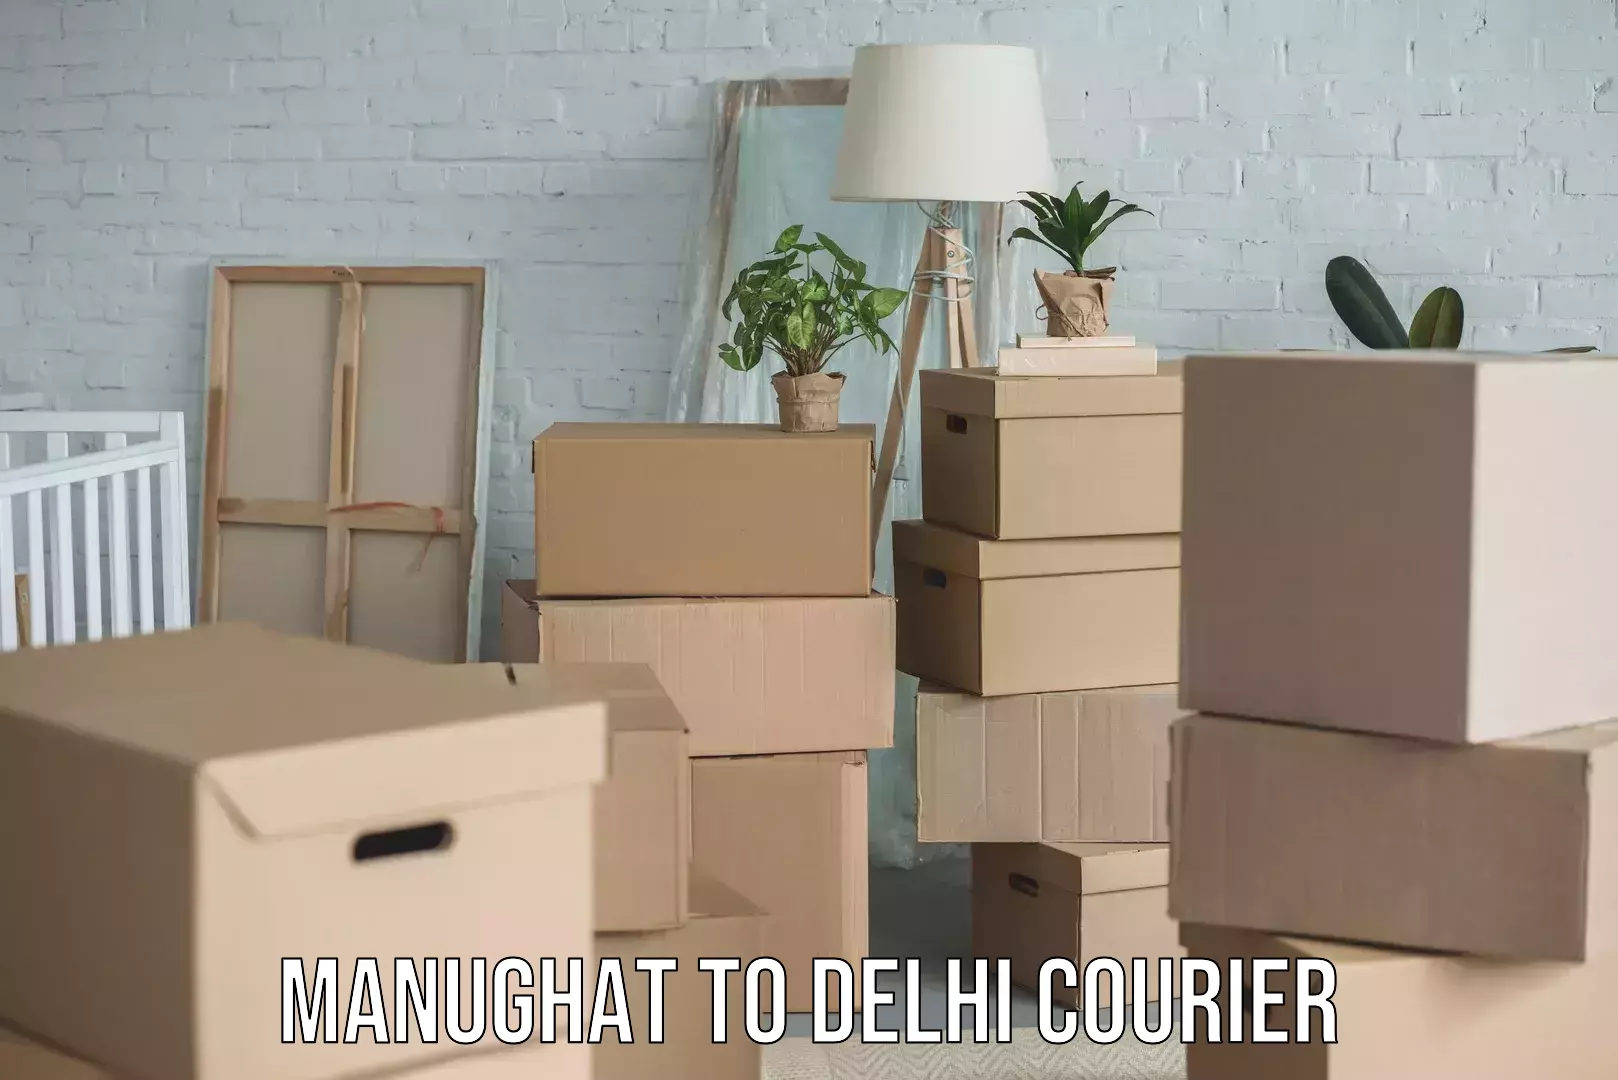 Full-service courier options Manughat to Delhi